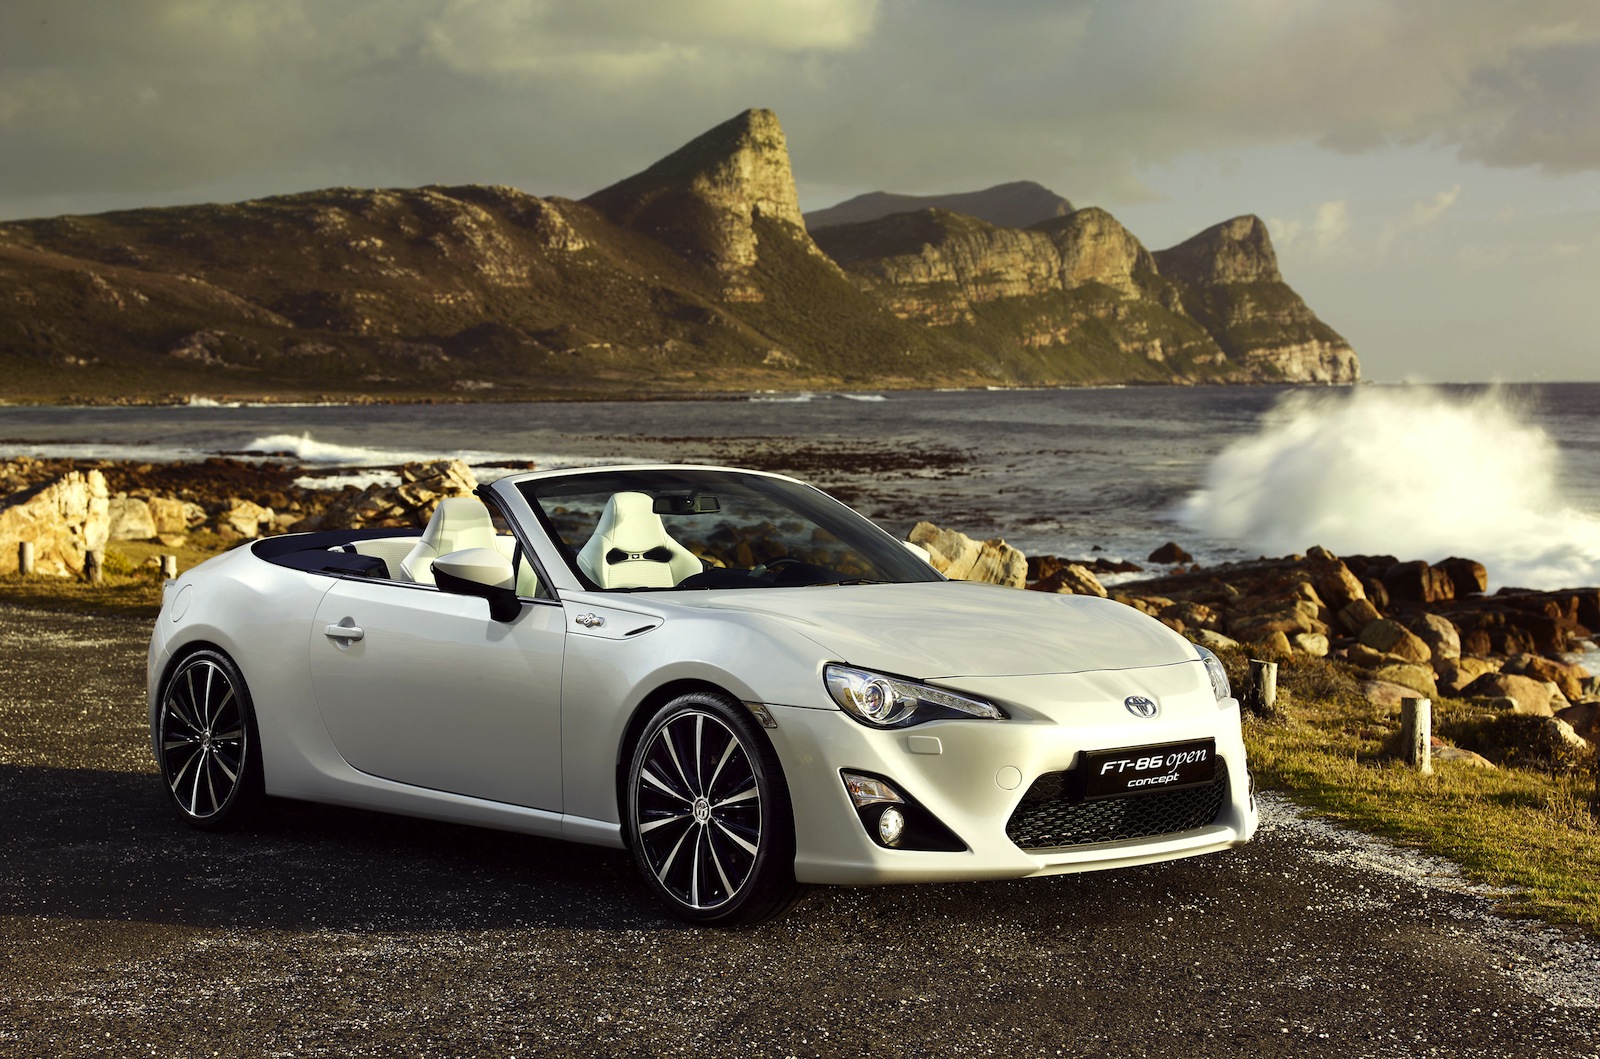 Toyota 86:: second generation sports car confirmed, due by 2019